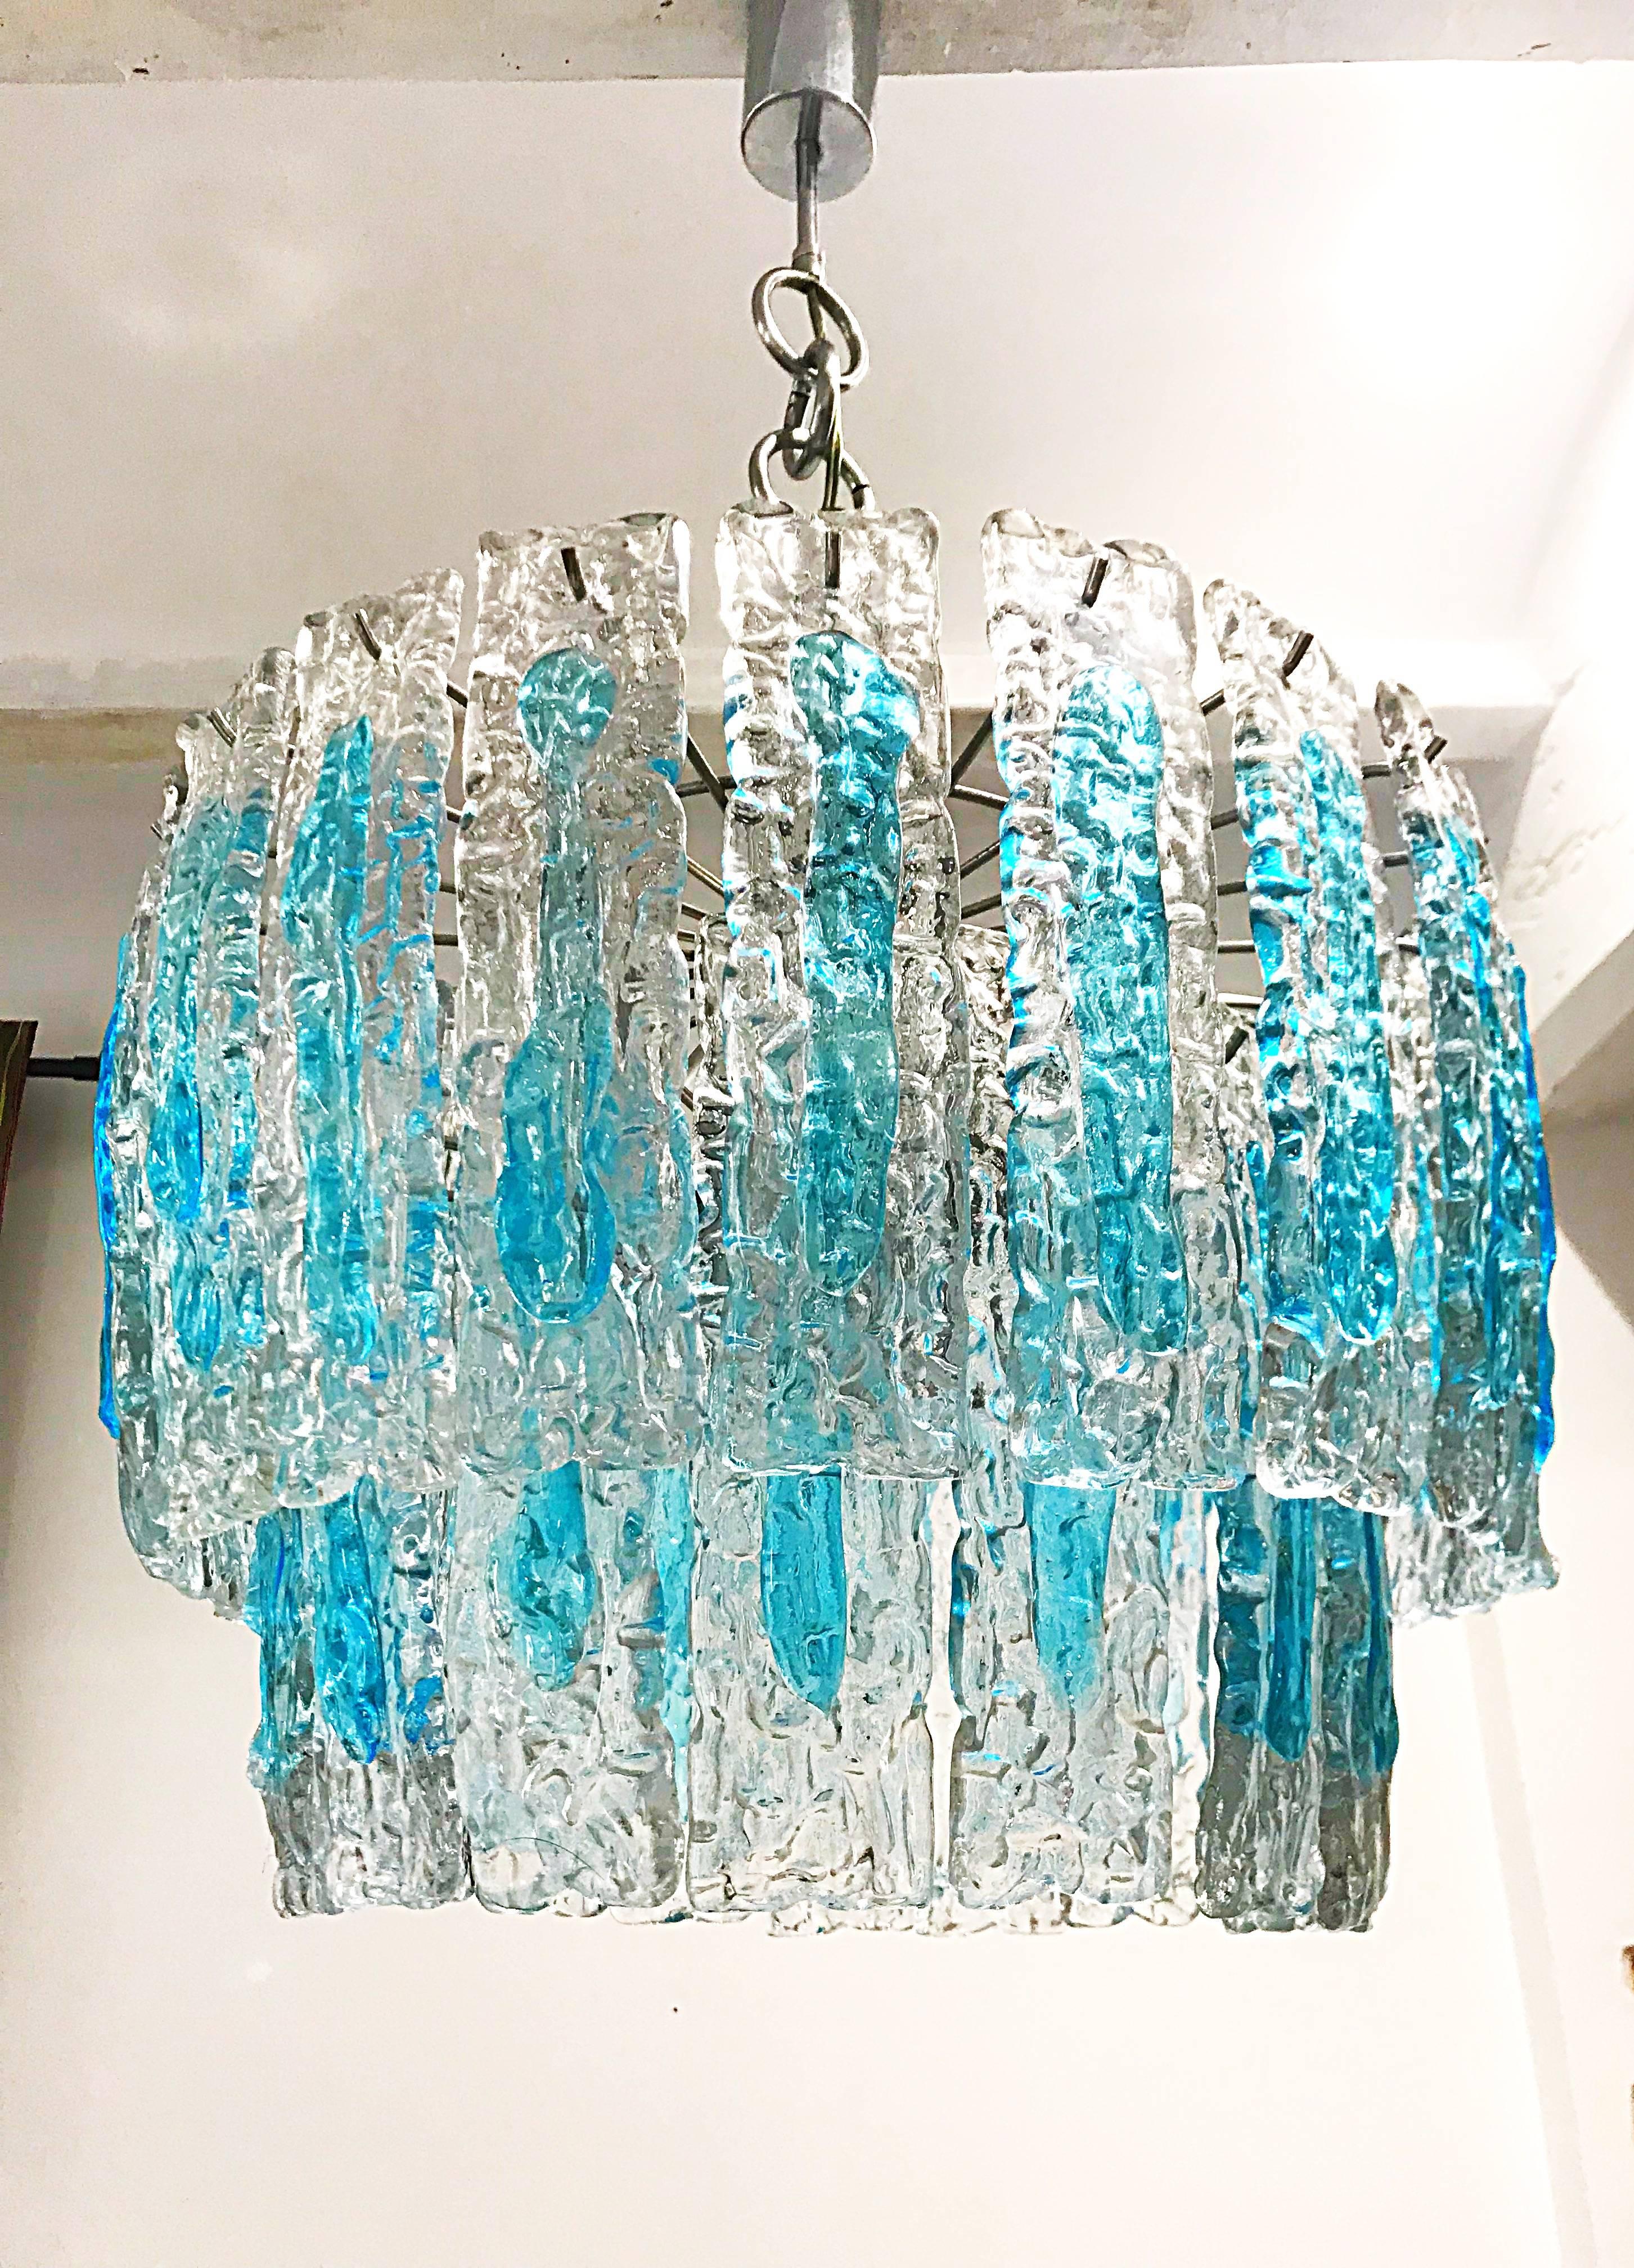 Italian Mid-Century Modern Blue colored glass chandelier handblown in Murano by Mazzega. This Piece has a double layer of glass and imparts a warm light. The inner layer has ten pieces and the outer layer has a long pieces with both forming an